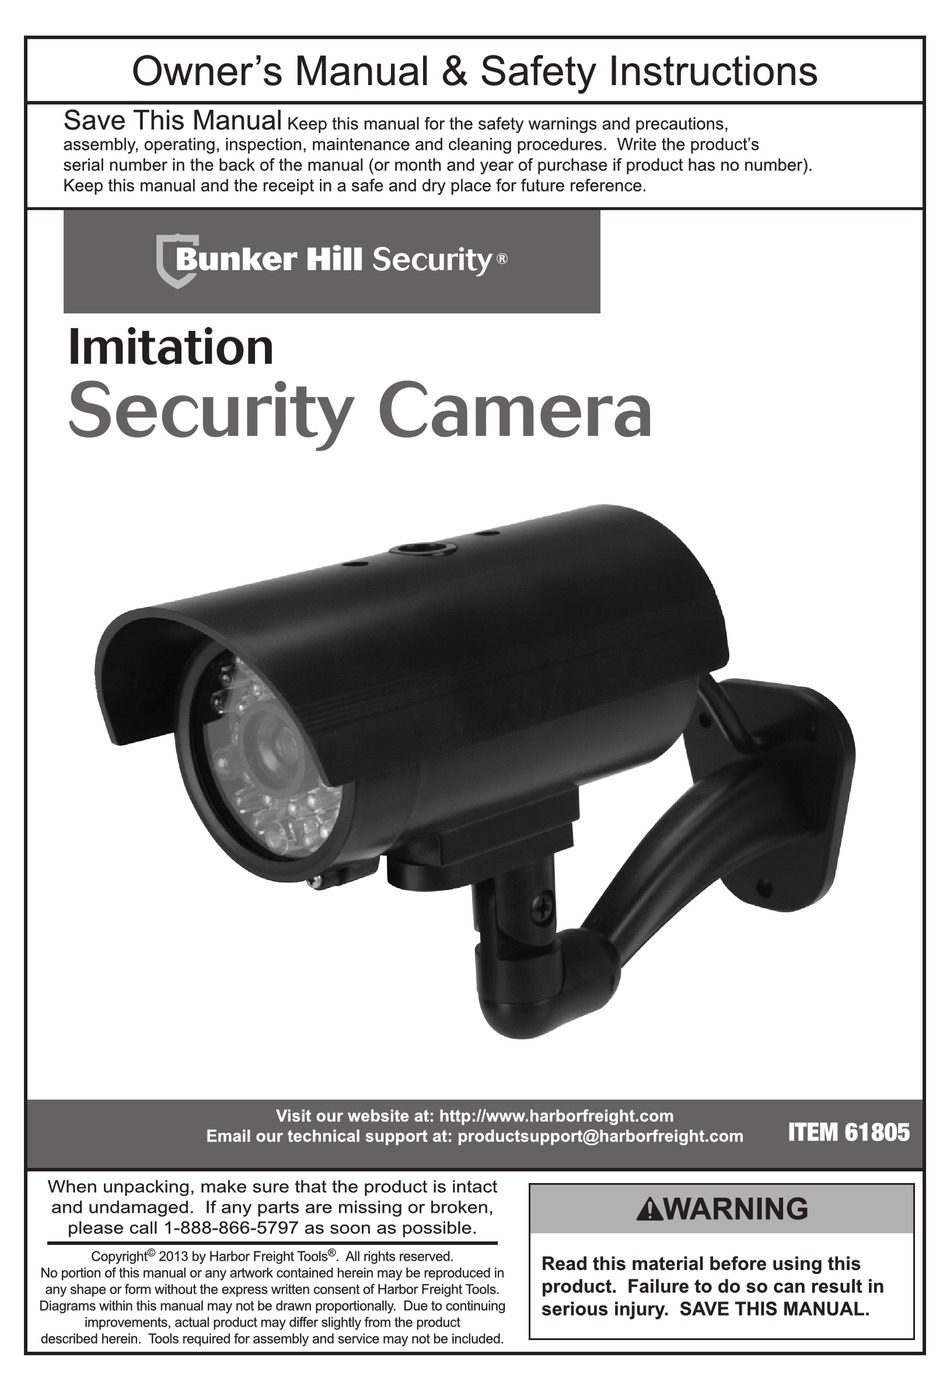 bunker hill wireless security camera receiver